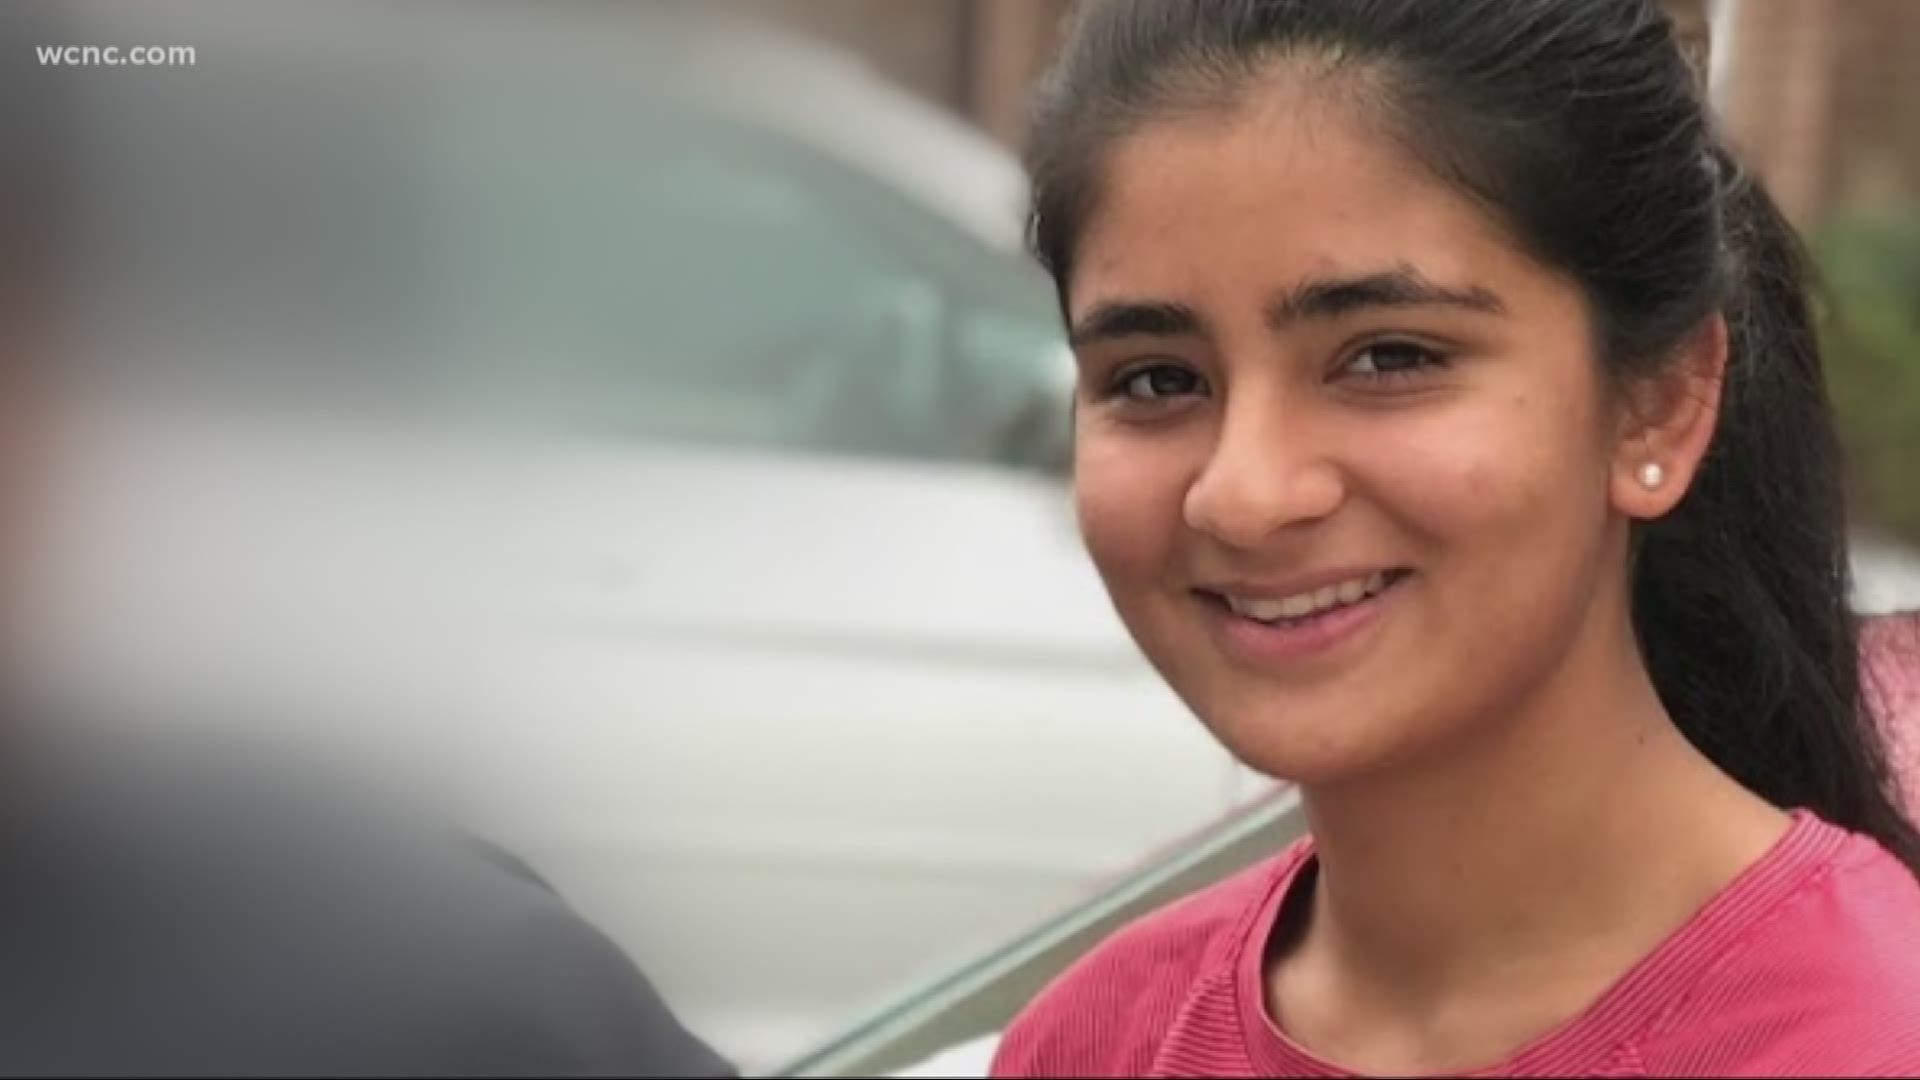 At 17, Shreya Mantha is running her own foundation for at-risk girls in our community.